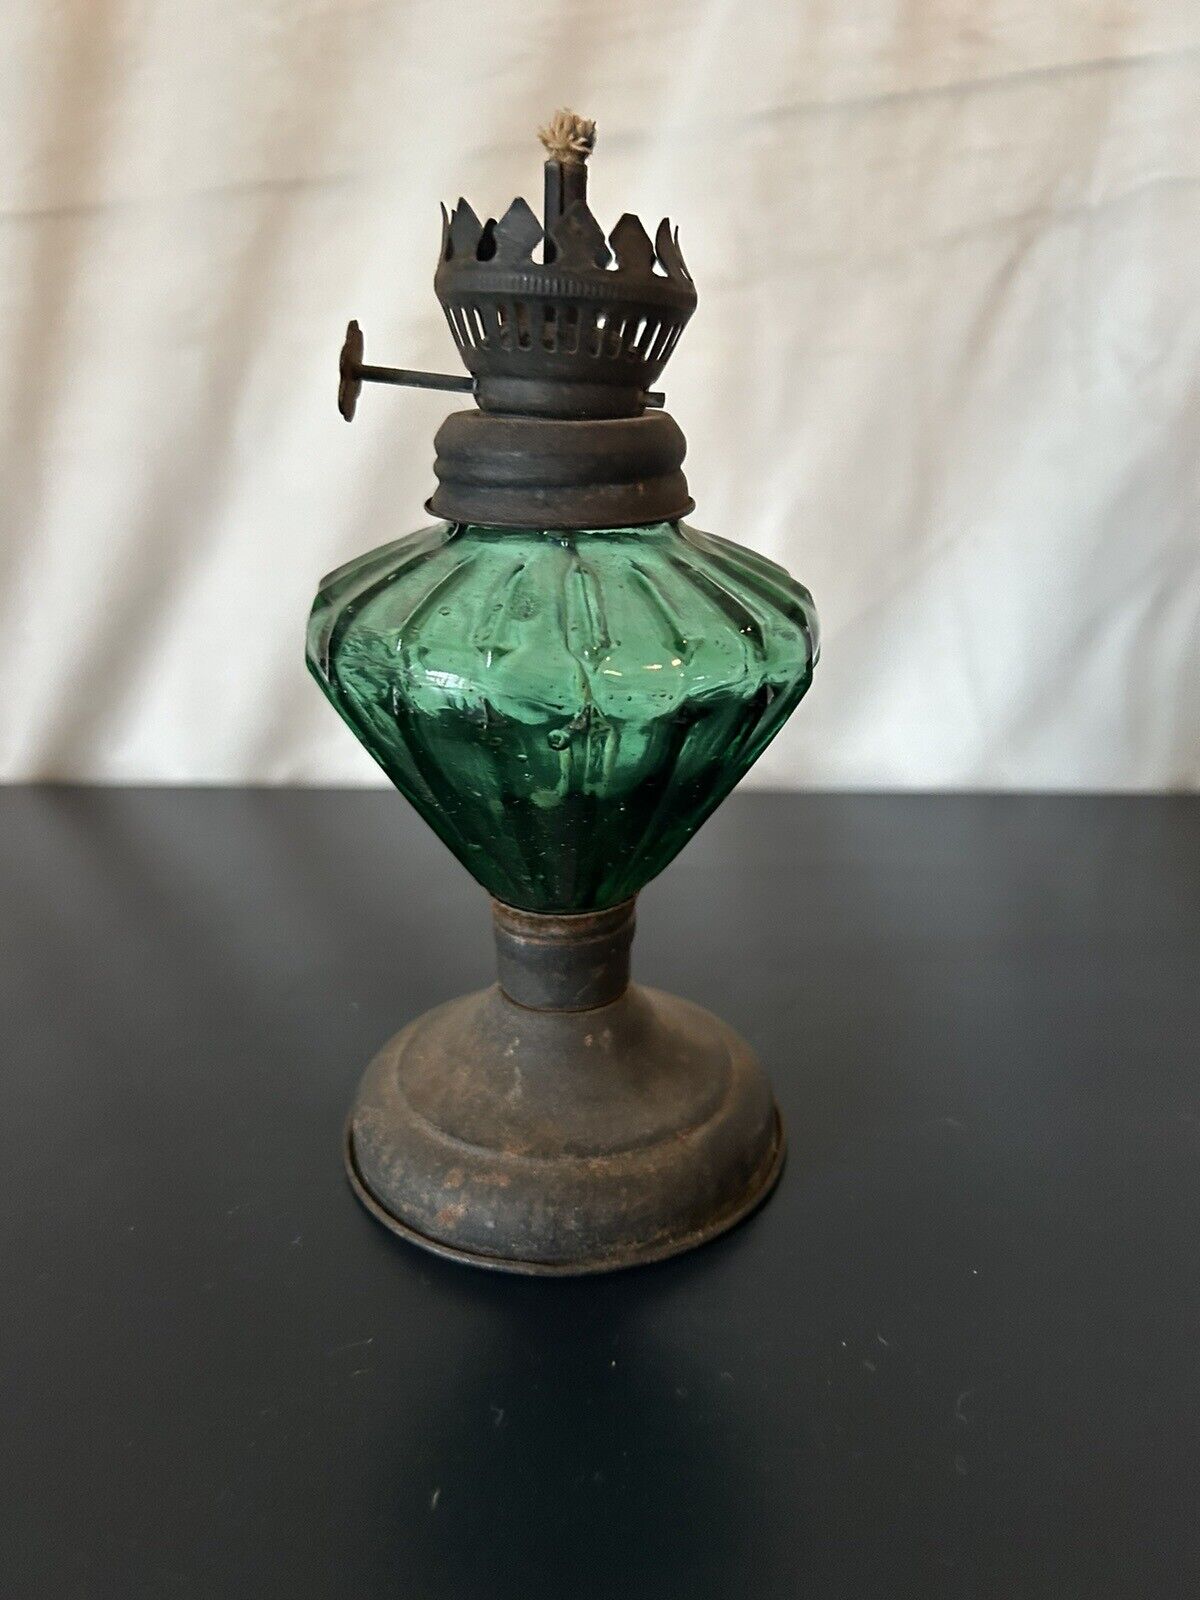 Vintage Green Depression Glass Oil Lamp Bubbles No Chimney Shade